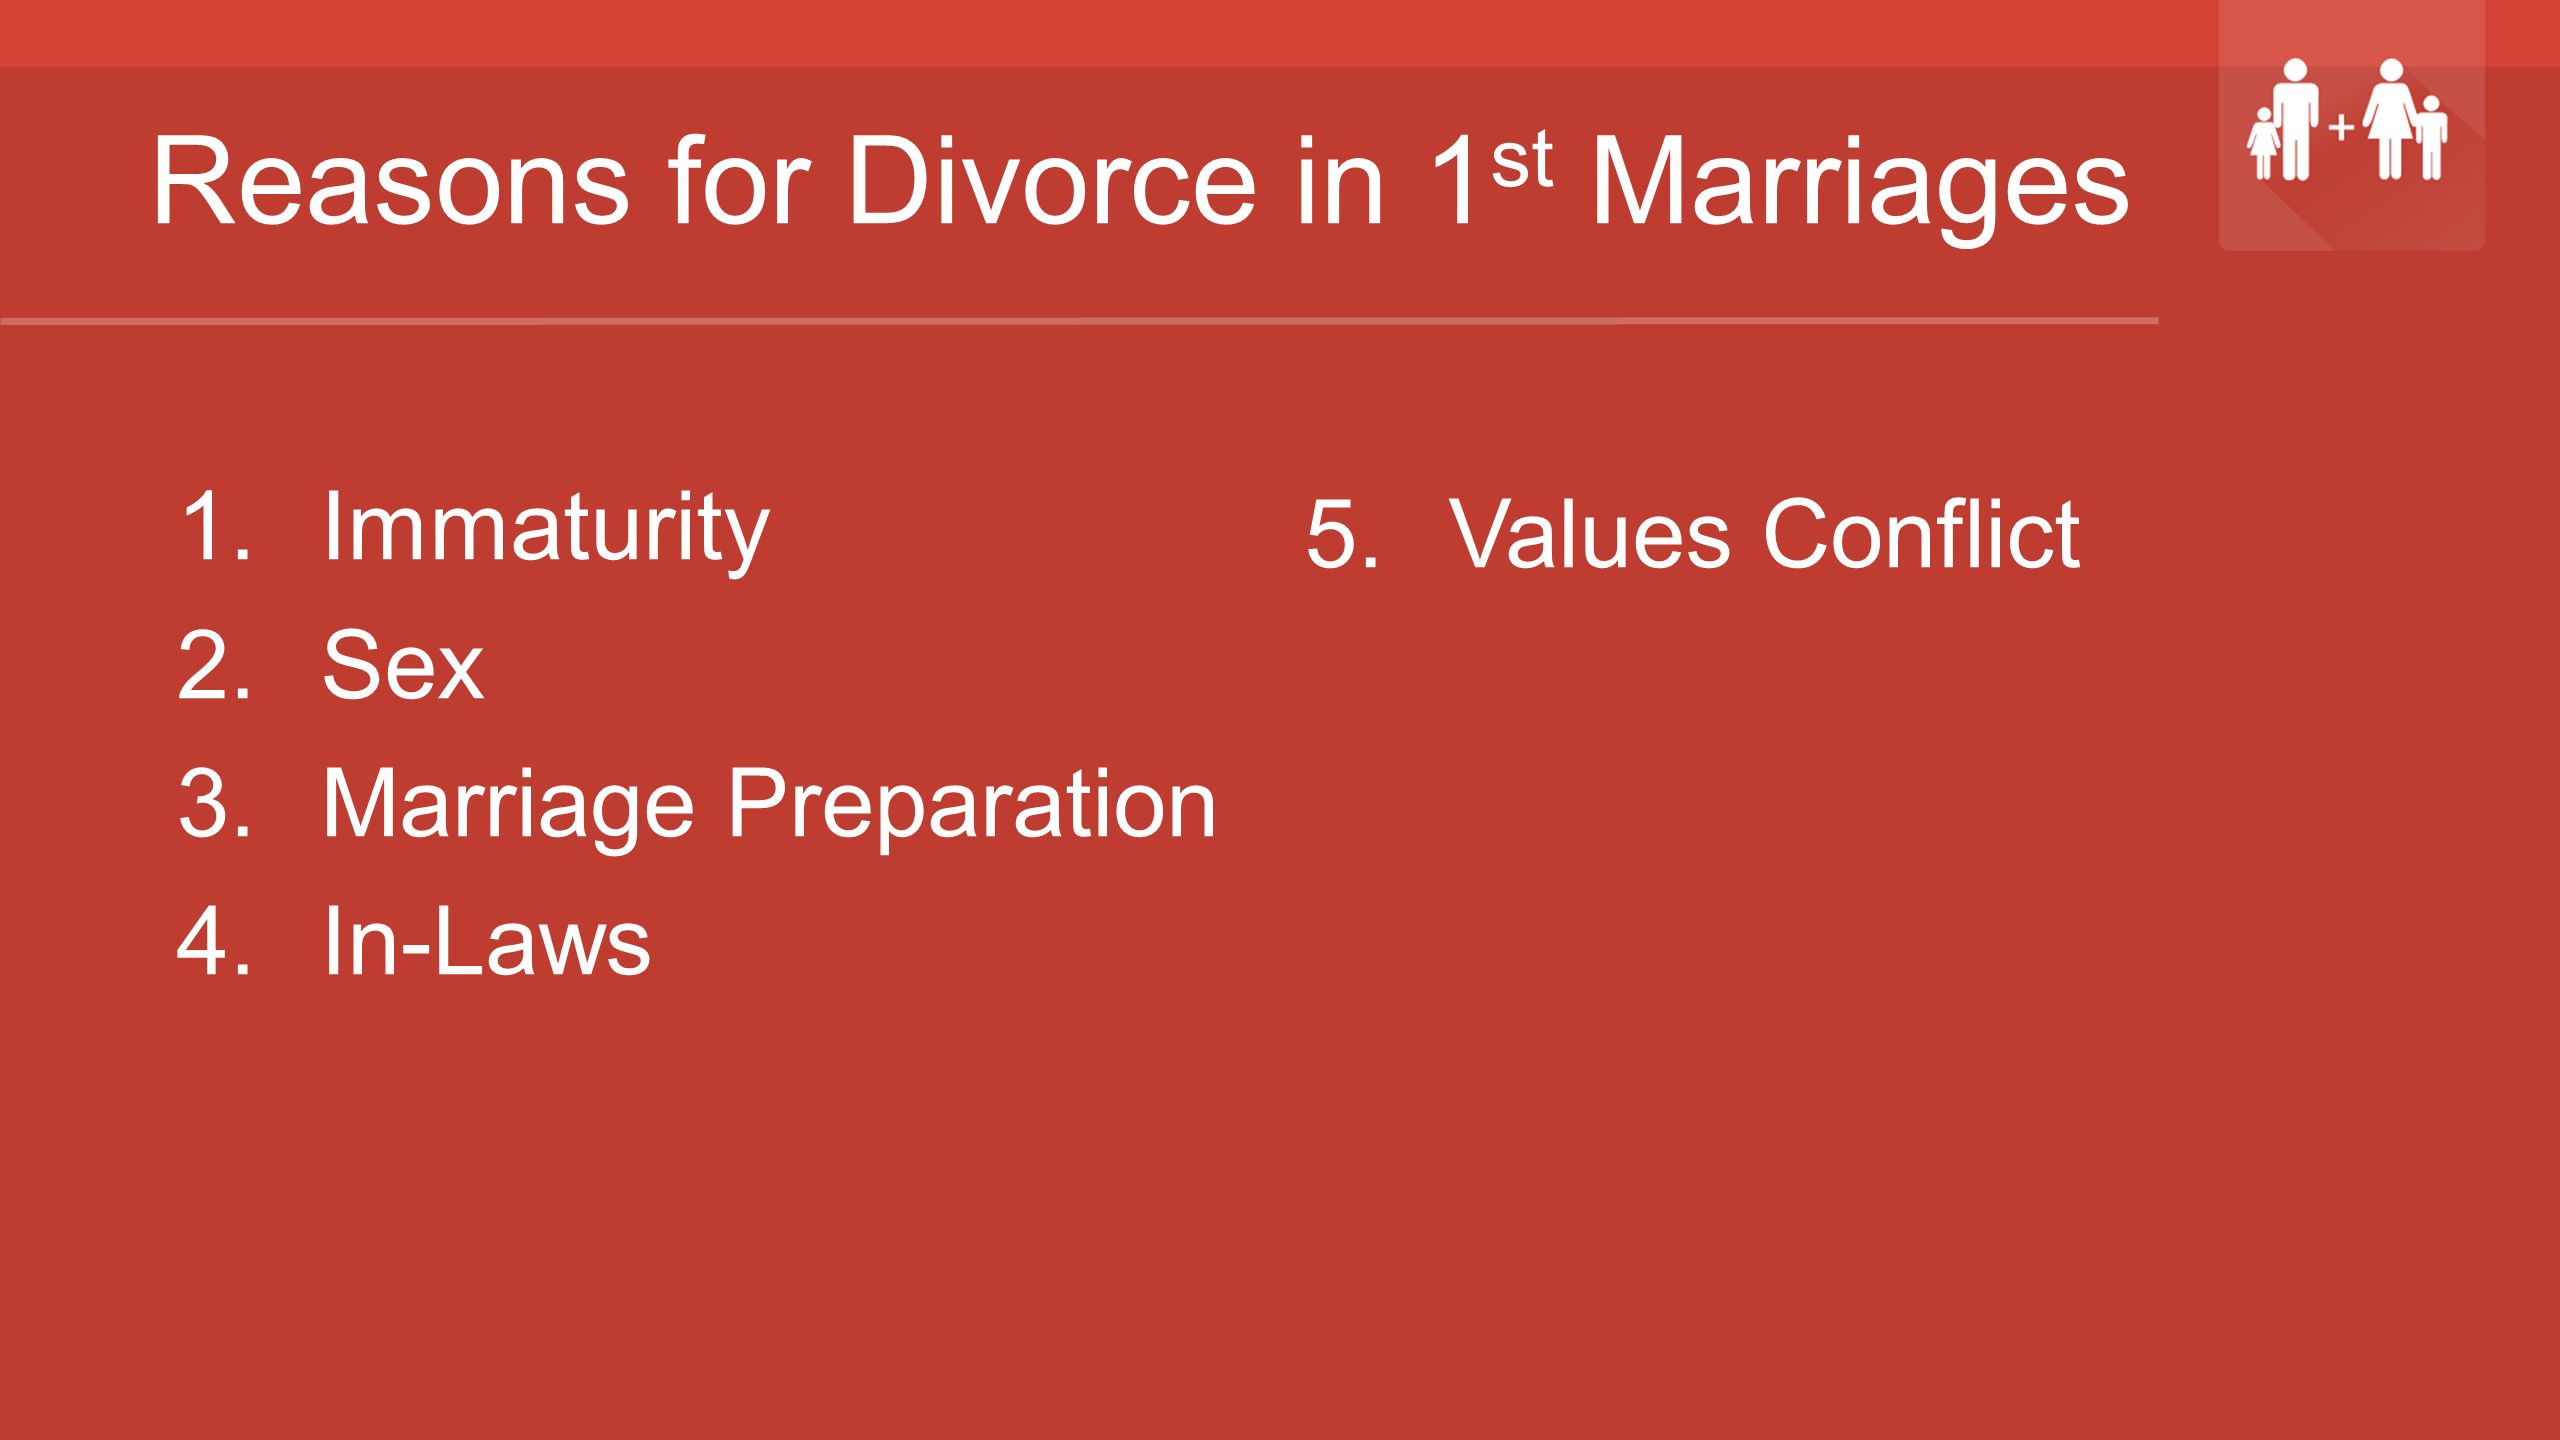 Reasons for Divorce in 1 st Marriages 1.Immaturity 2.Sex 3.Marriage Preparation 4.In-Laws 5.Values Conflict